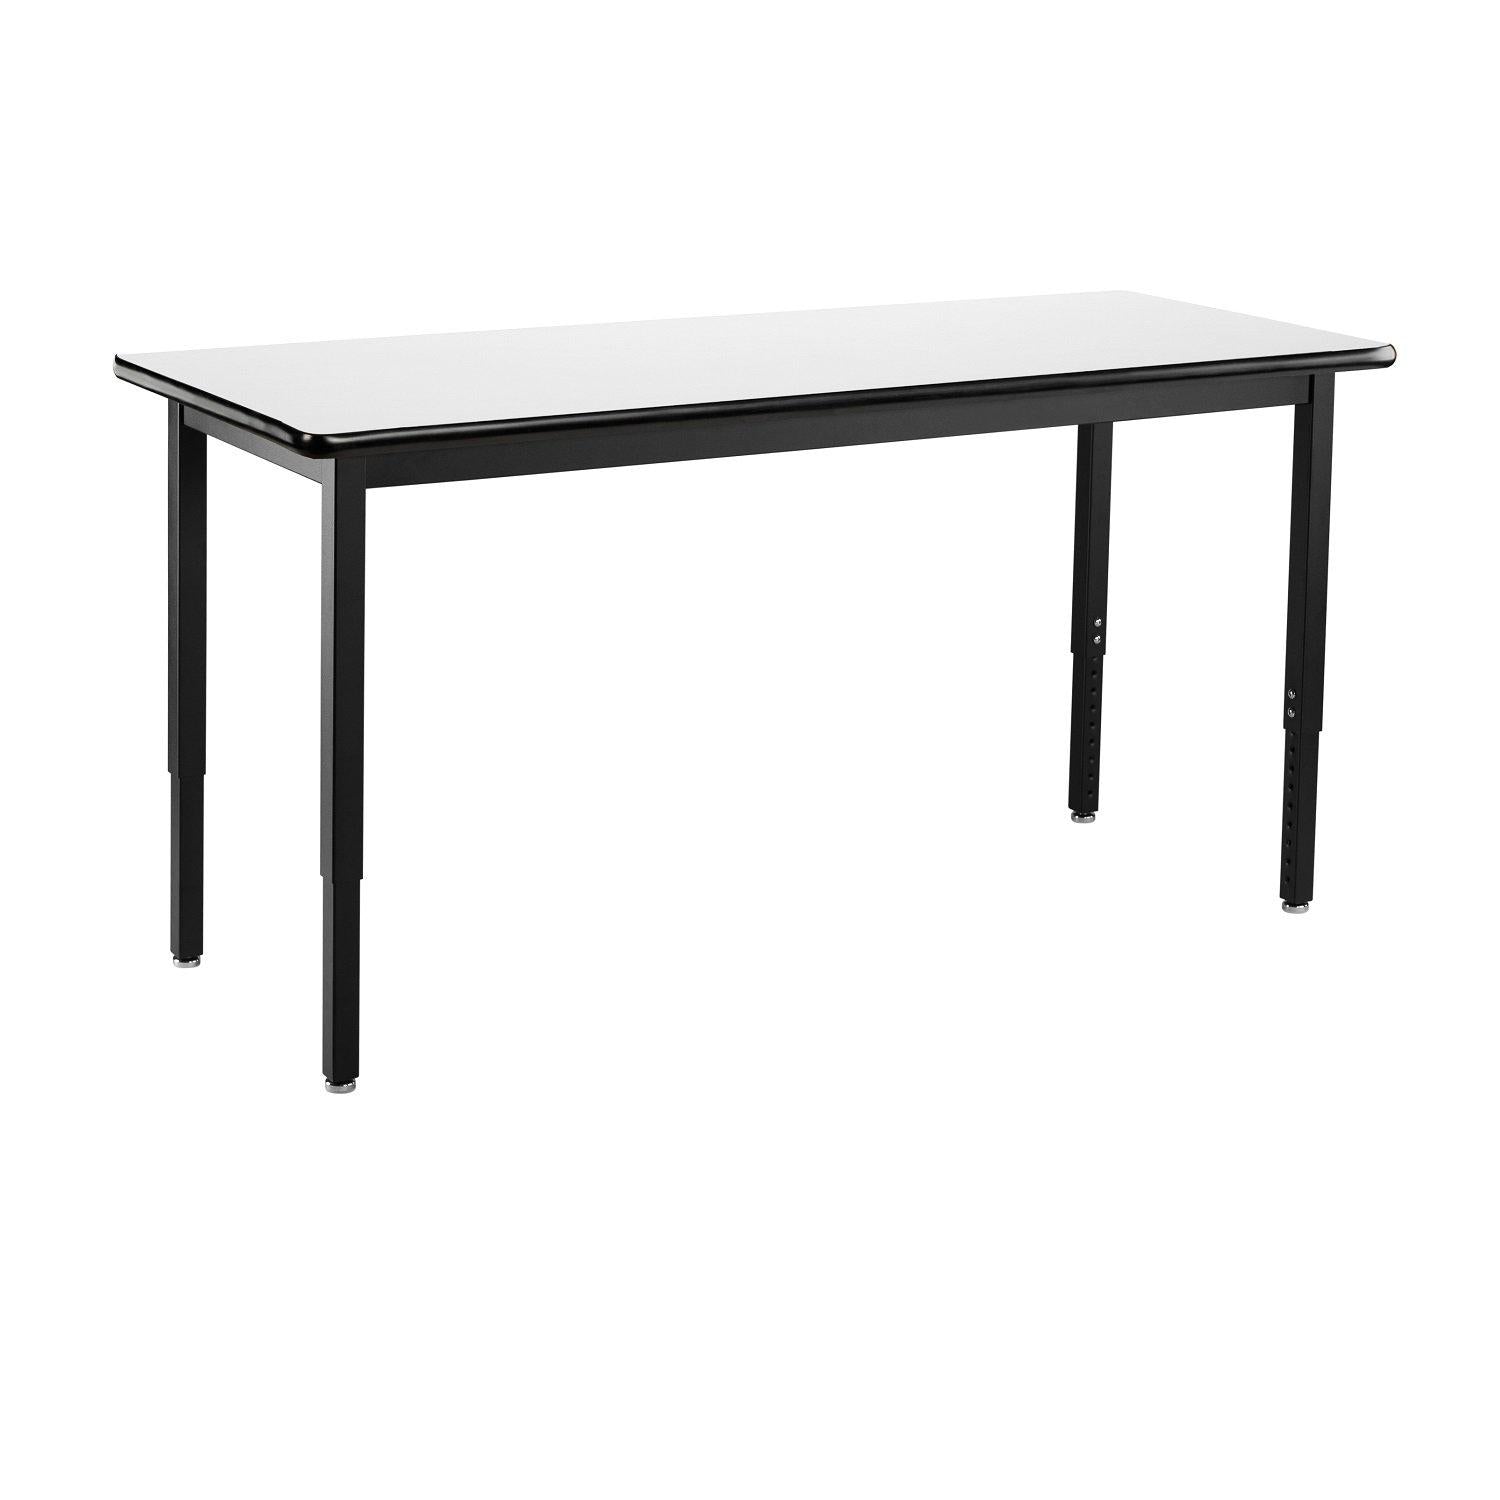 Heavy-Duty Height-Adjustable Utility Table, Black Frame, 24" x 60", Whiteboard High-Pressure Laminate Top